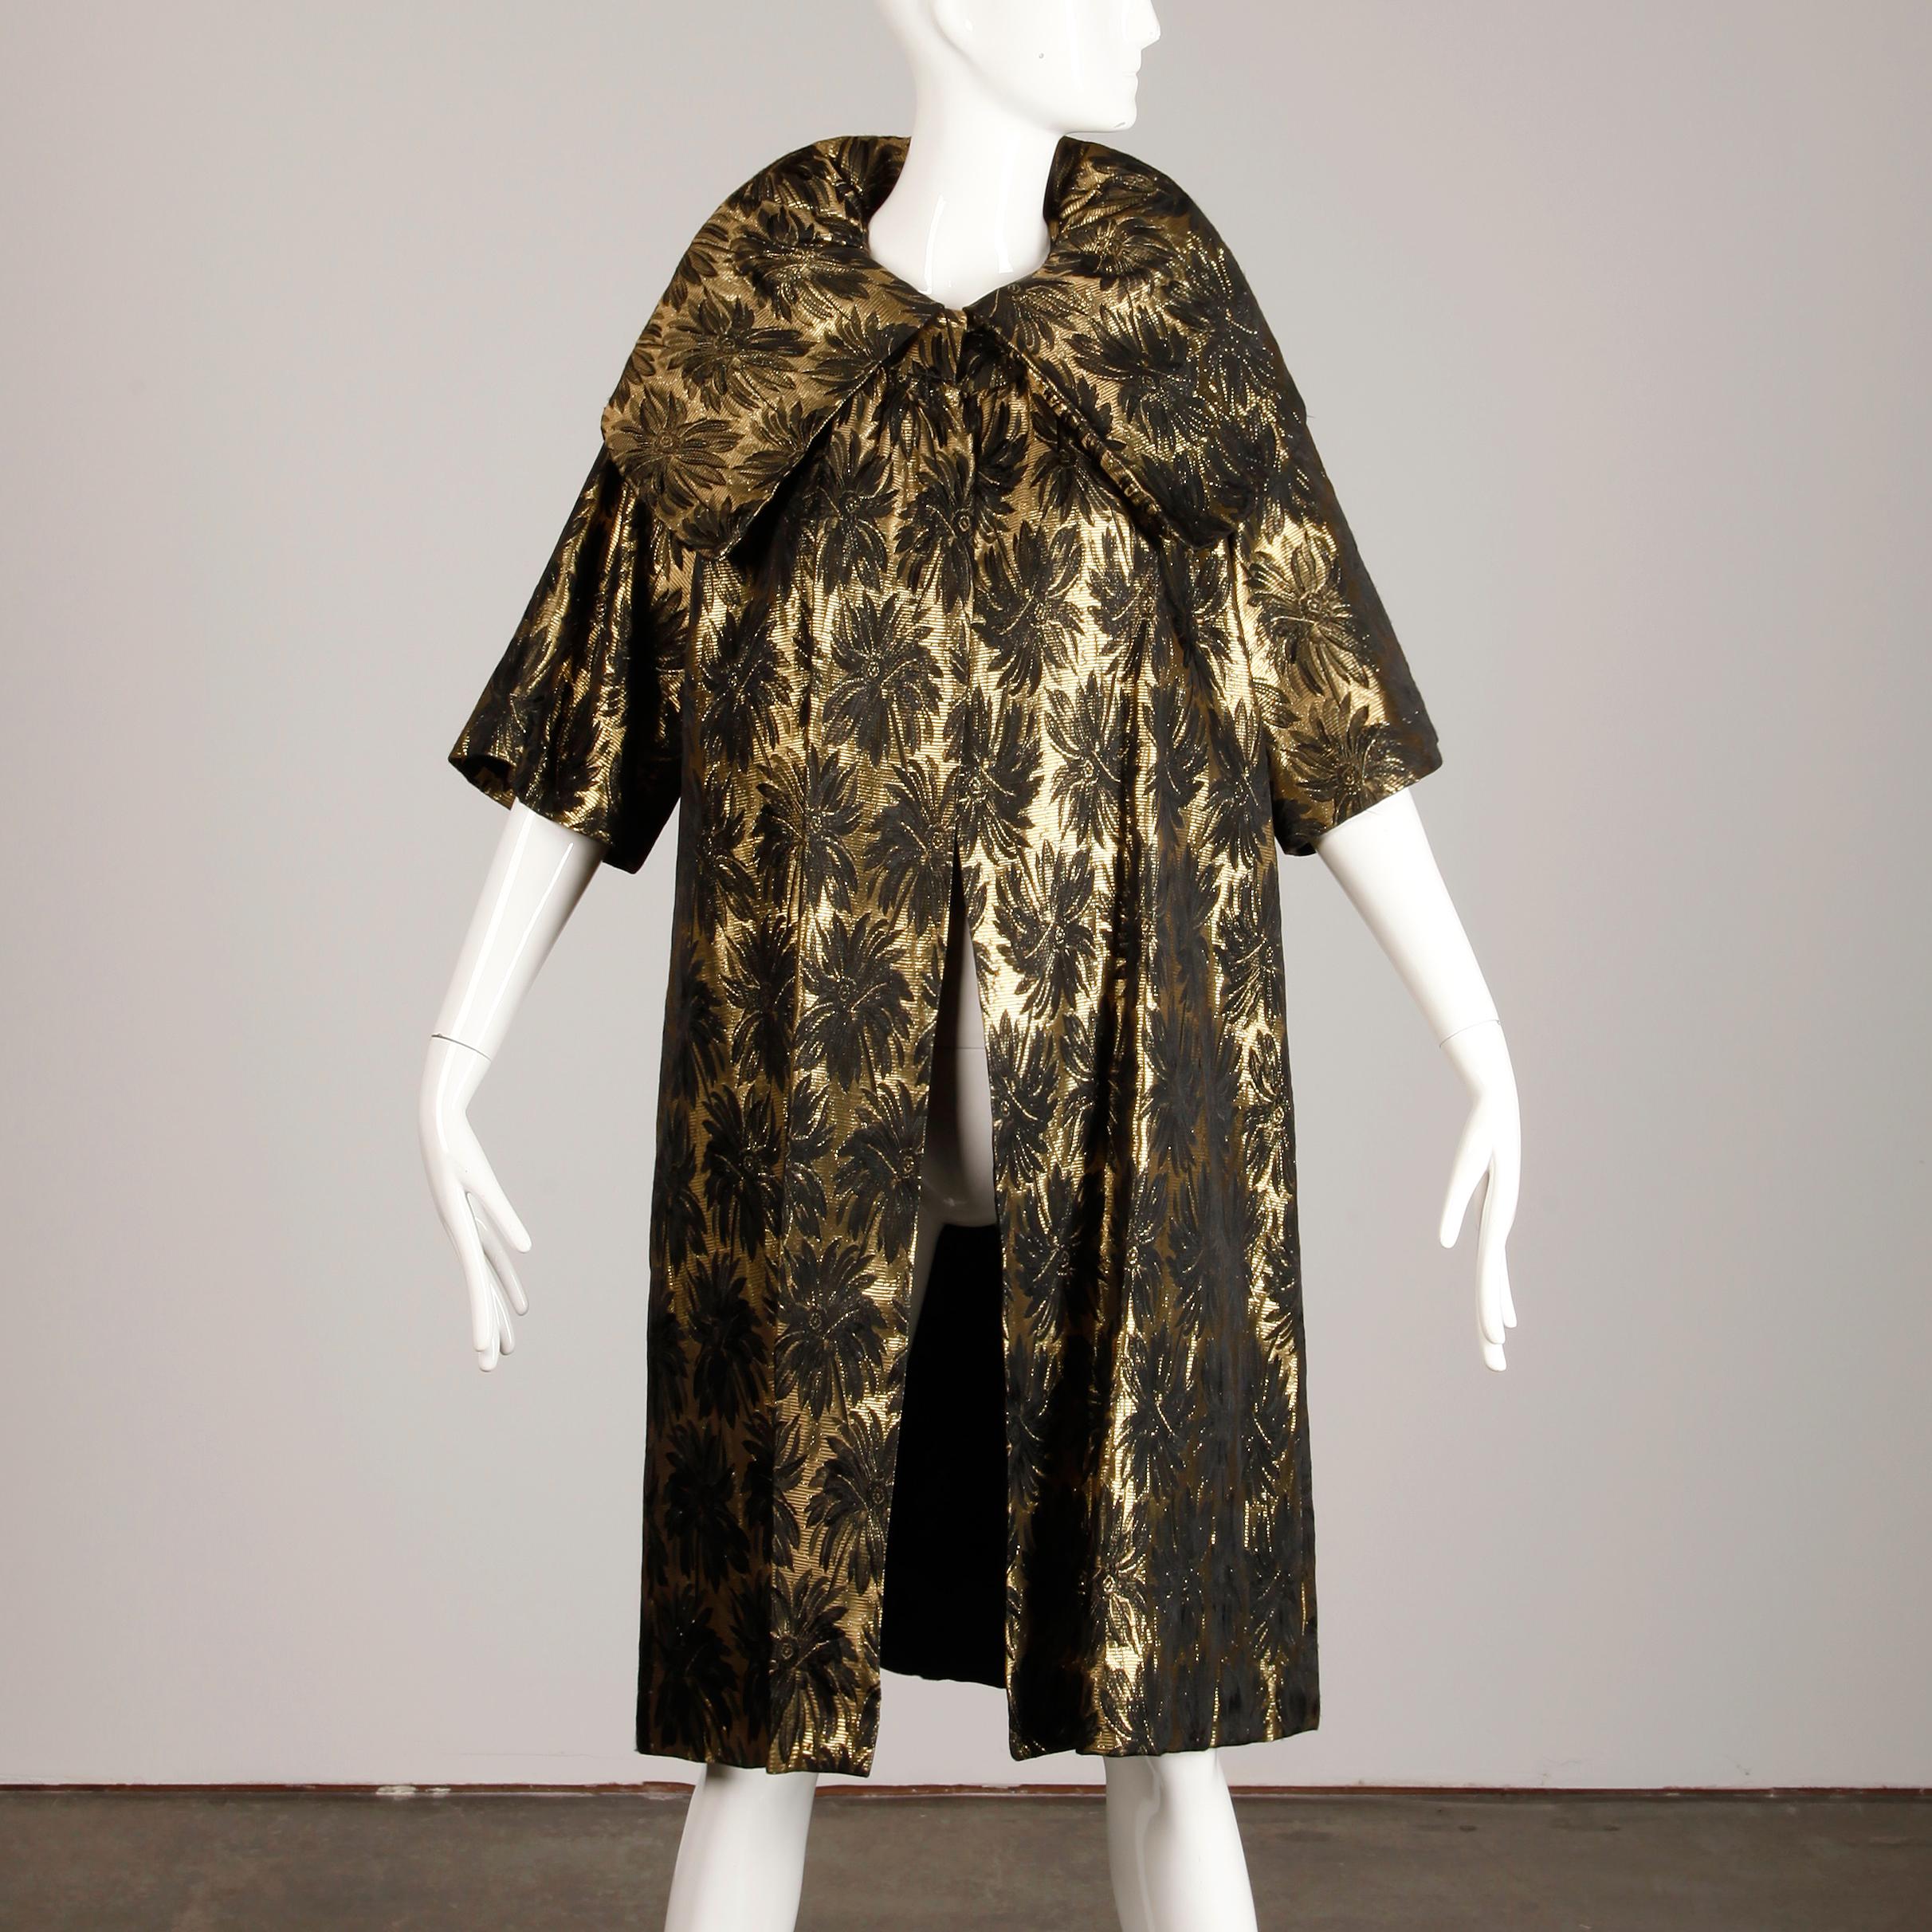 Women's 1960s Vintage Metallic Gold Damask Opera or Evening Coat with Pop Up Collar For Sale